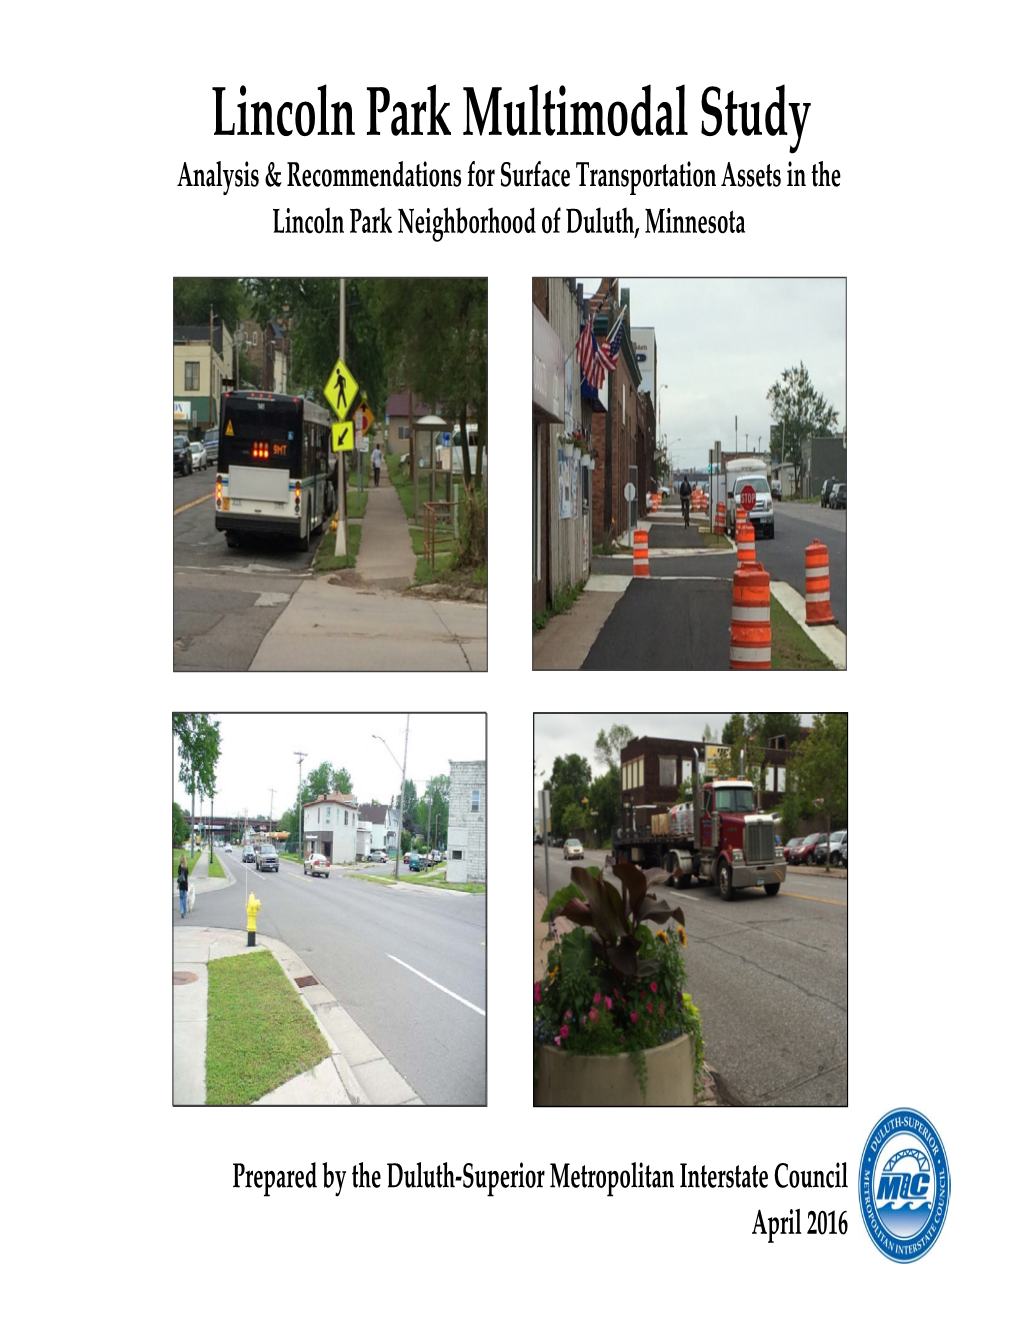 Lincoln Park Multimodal Study Analysis & Recommendations for Surface Transportation Assets in the Lincoln Park Neighborhood of Duluth, Minnesota